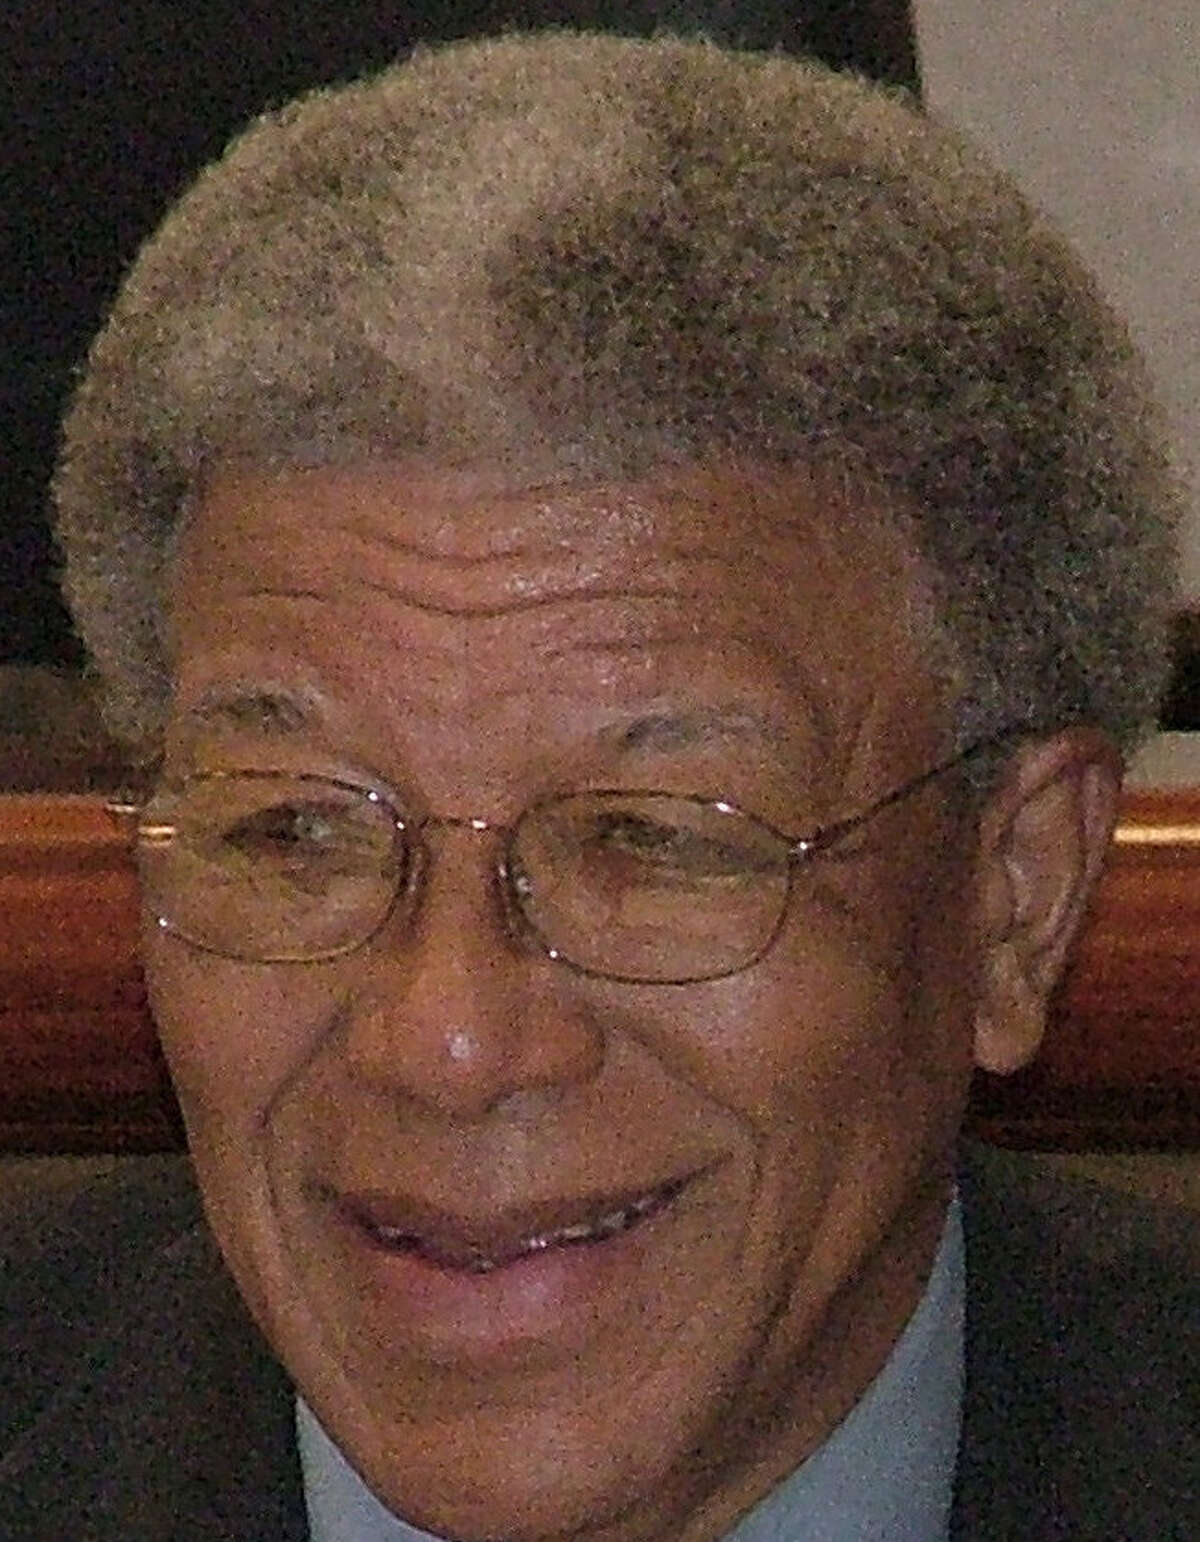 Edd White became the first African American elected to the NEISD board when he won the District 2 seat in 1996.